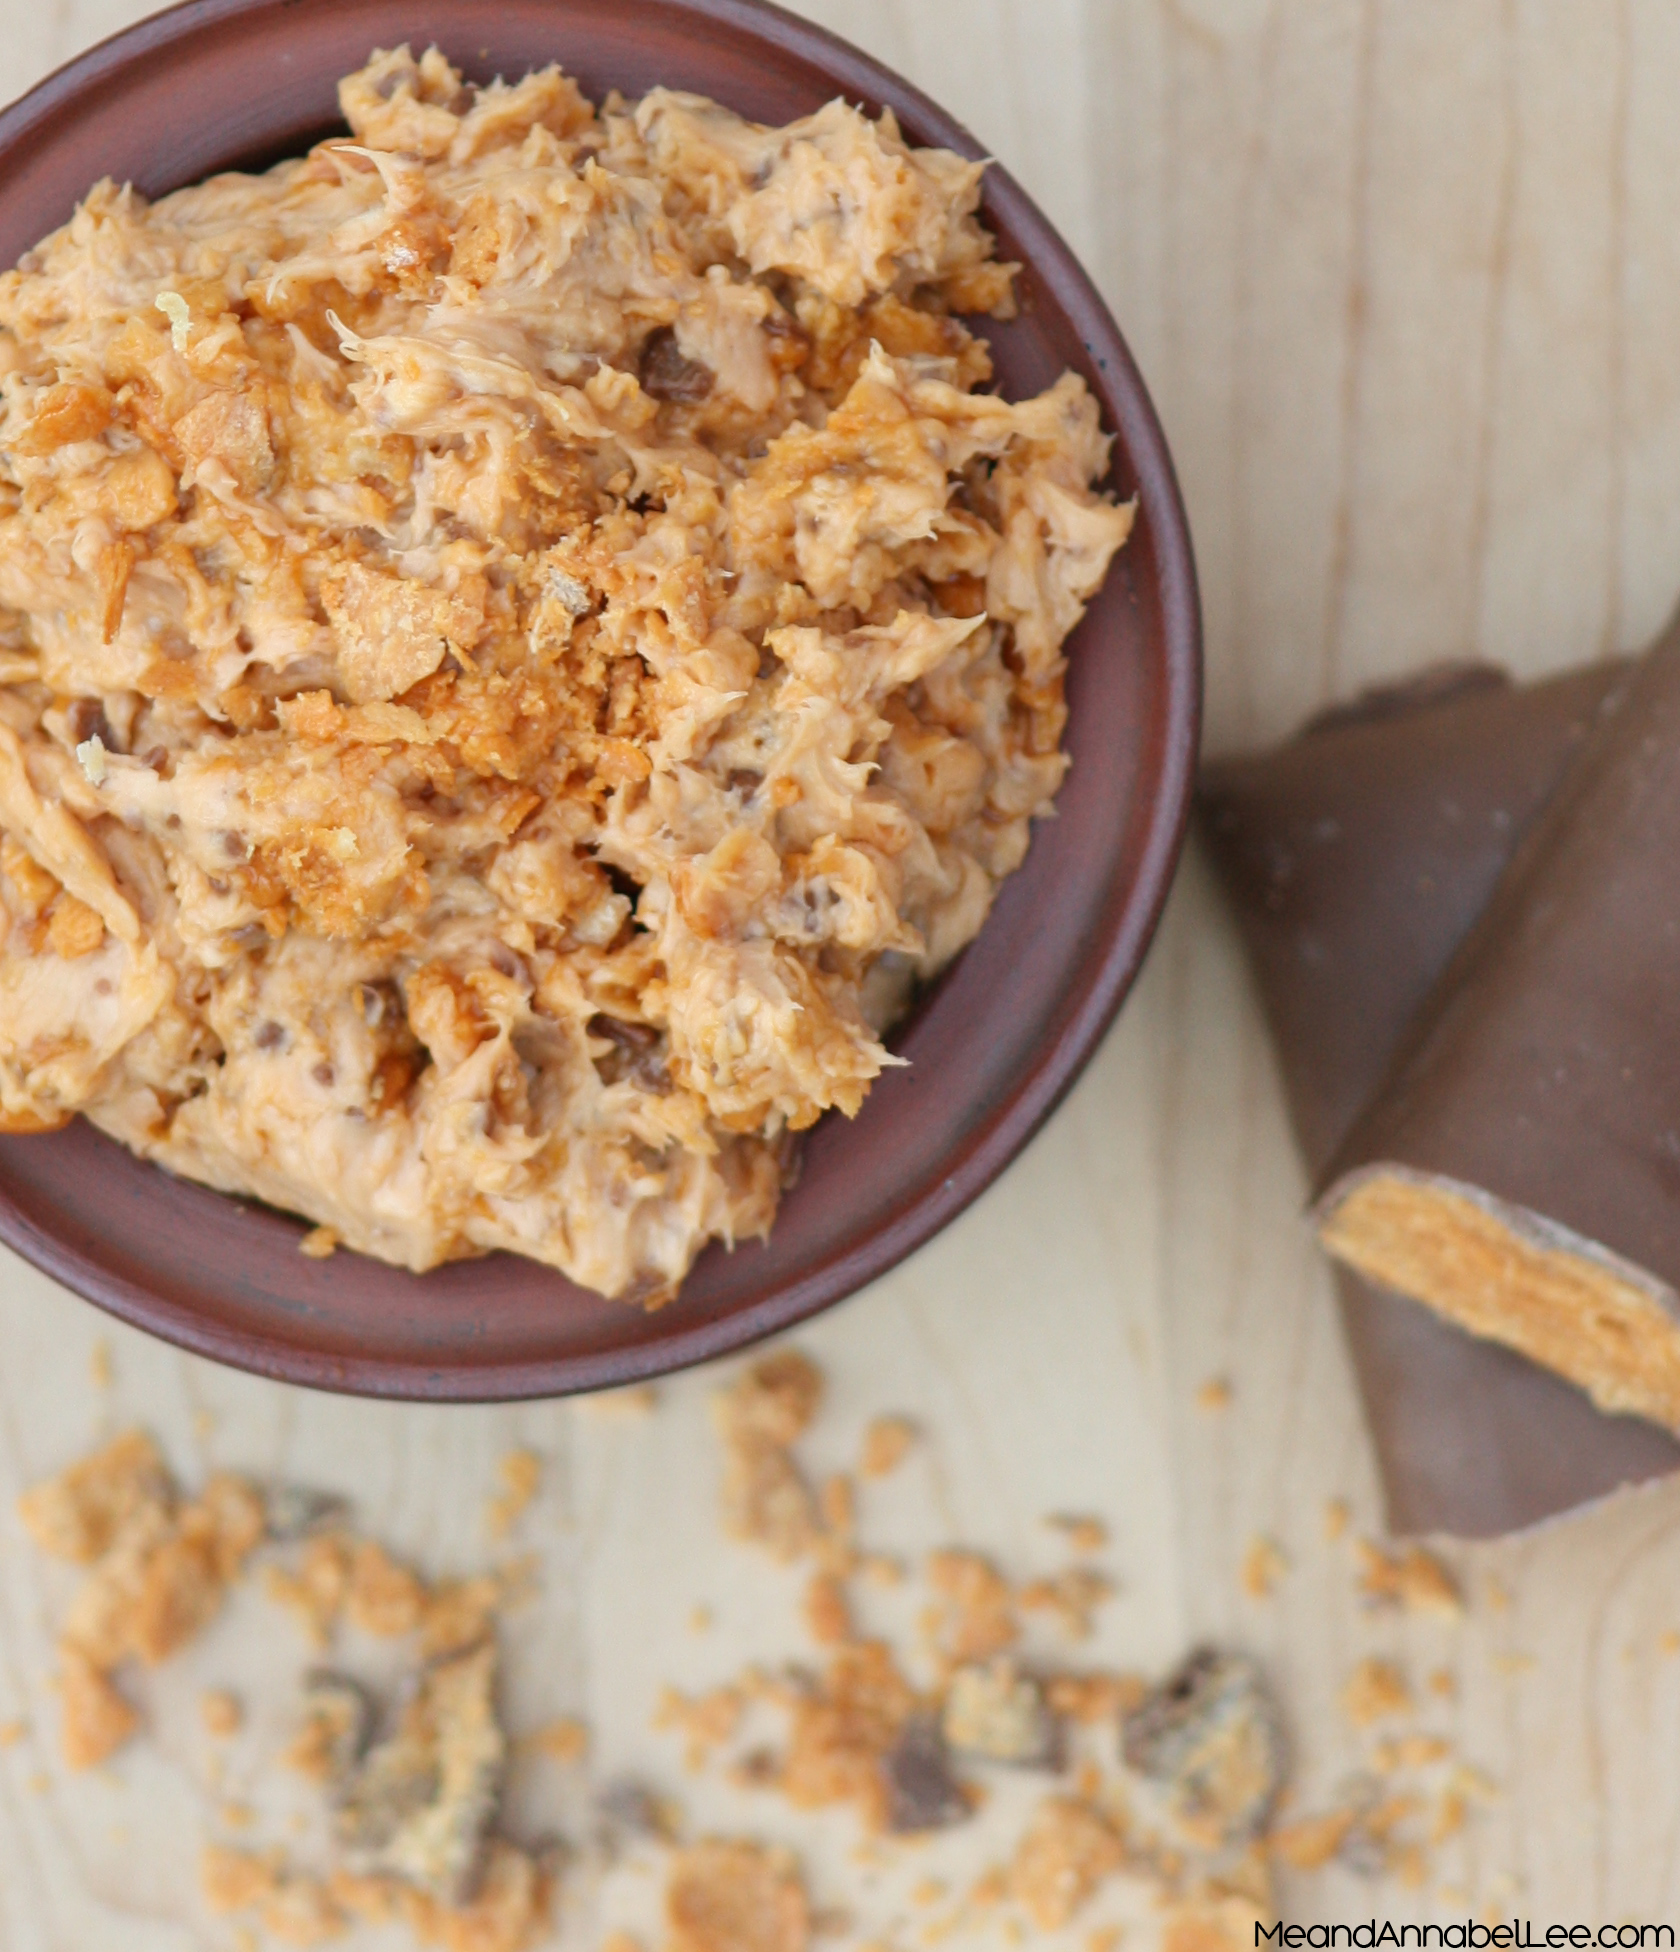 Butterfinger Cream Cheese Spread - Looking for something to do with that leftover Halloween Candy? Try this sweet spread! www.MeandAnnabelLee.com